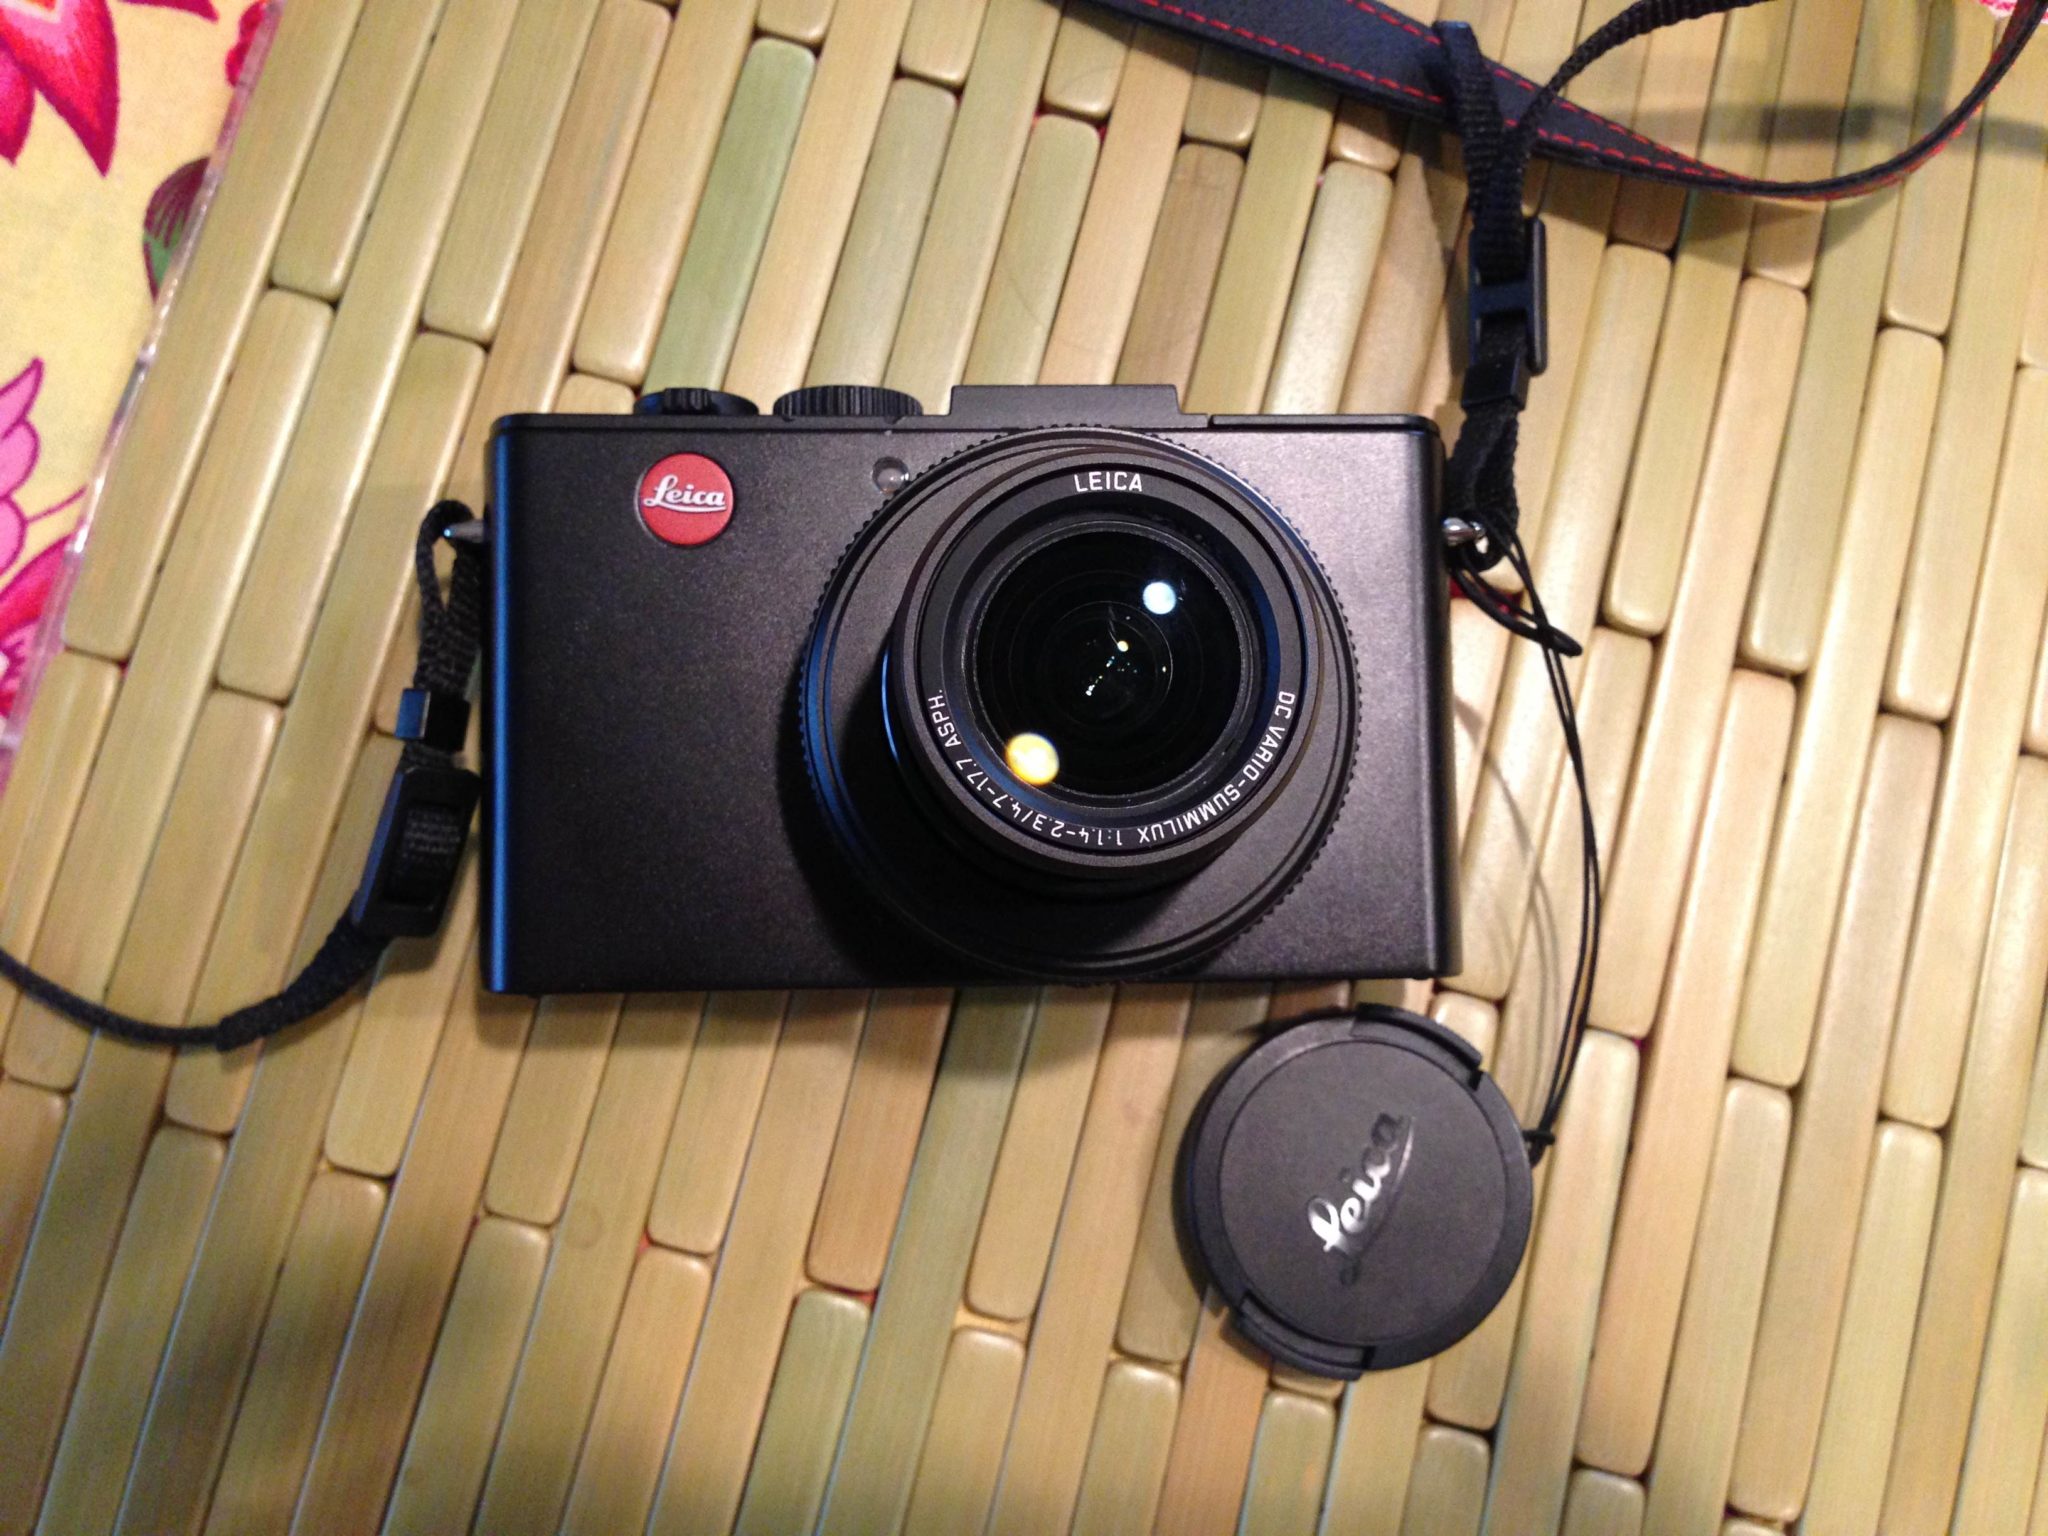 Sample Photos from the Leica D-Lux 6 Camera